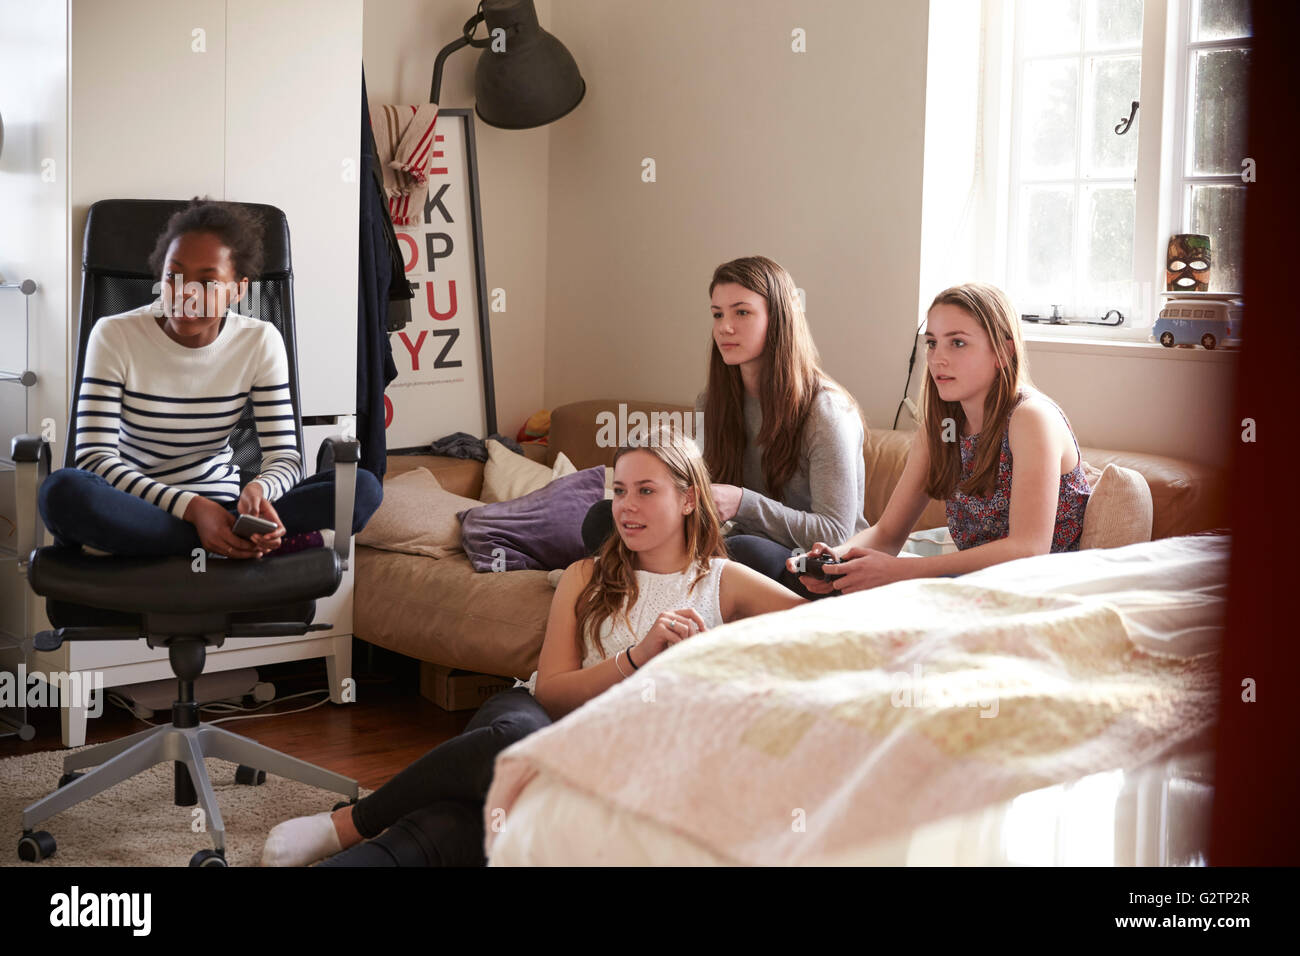 Group Of Teenage Girls Playing Video Game In Bedroom Stock Photo